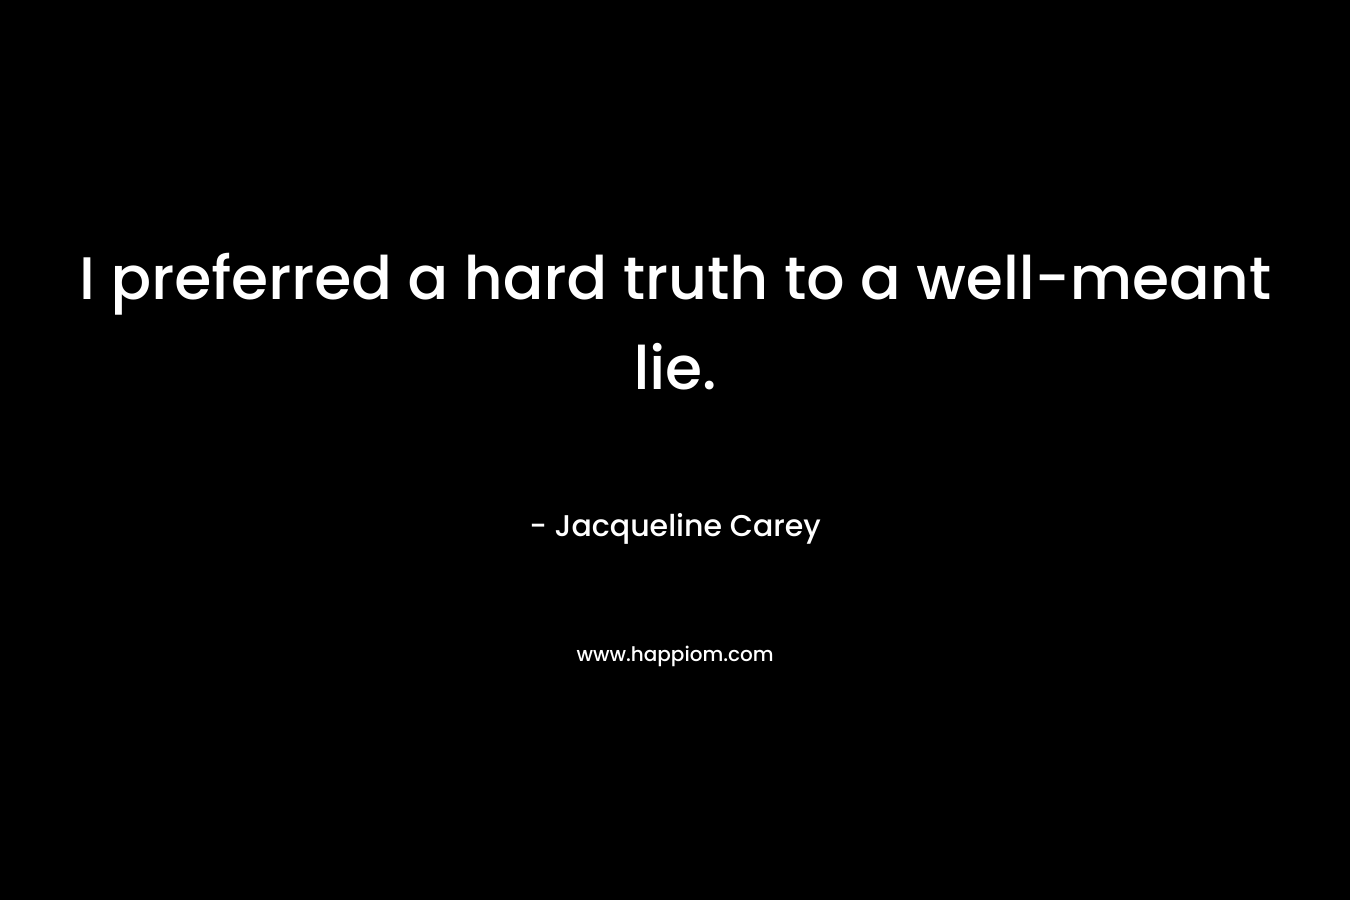 I preferred a hard truth to a well-meant lie.